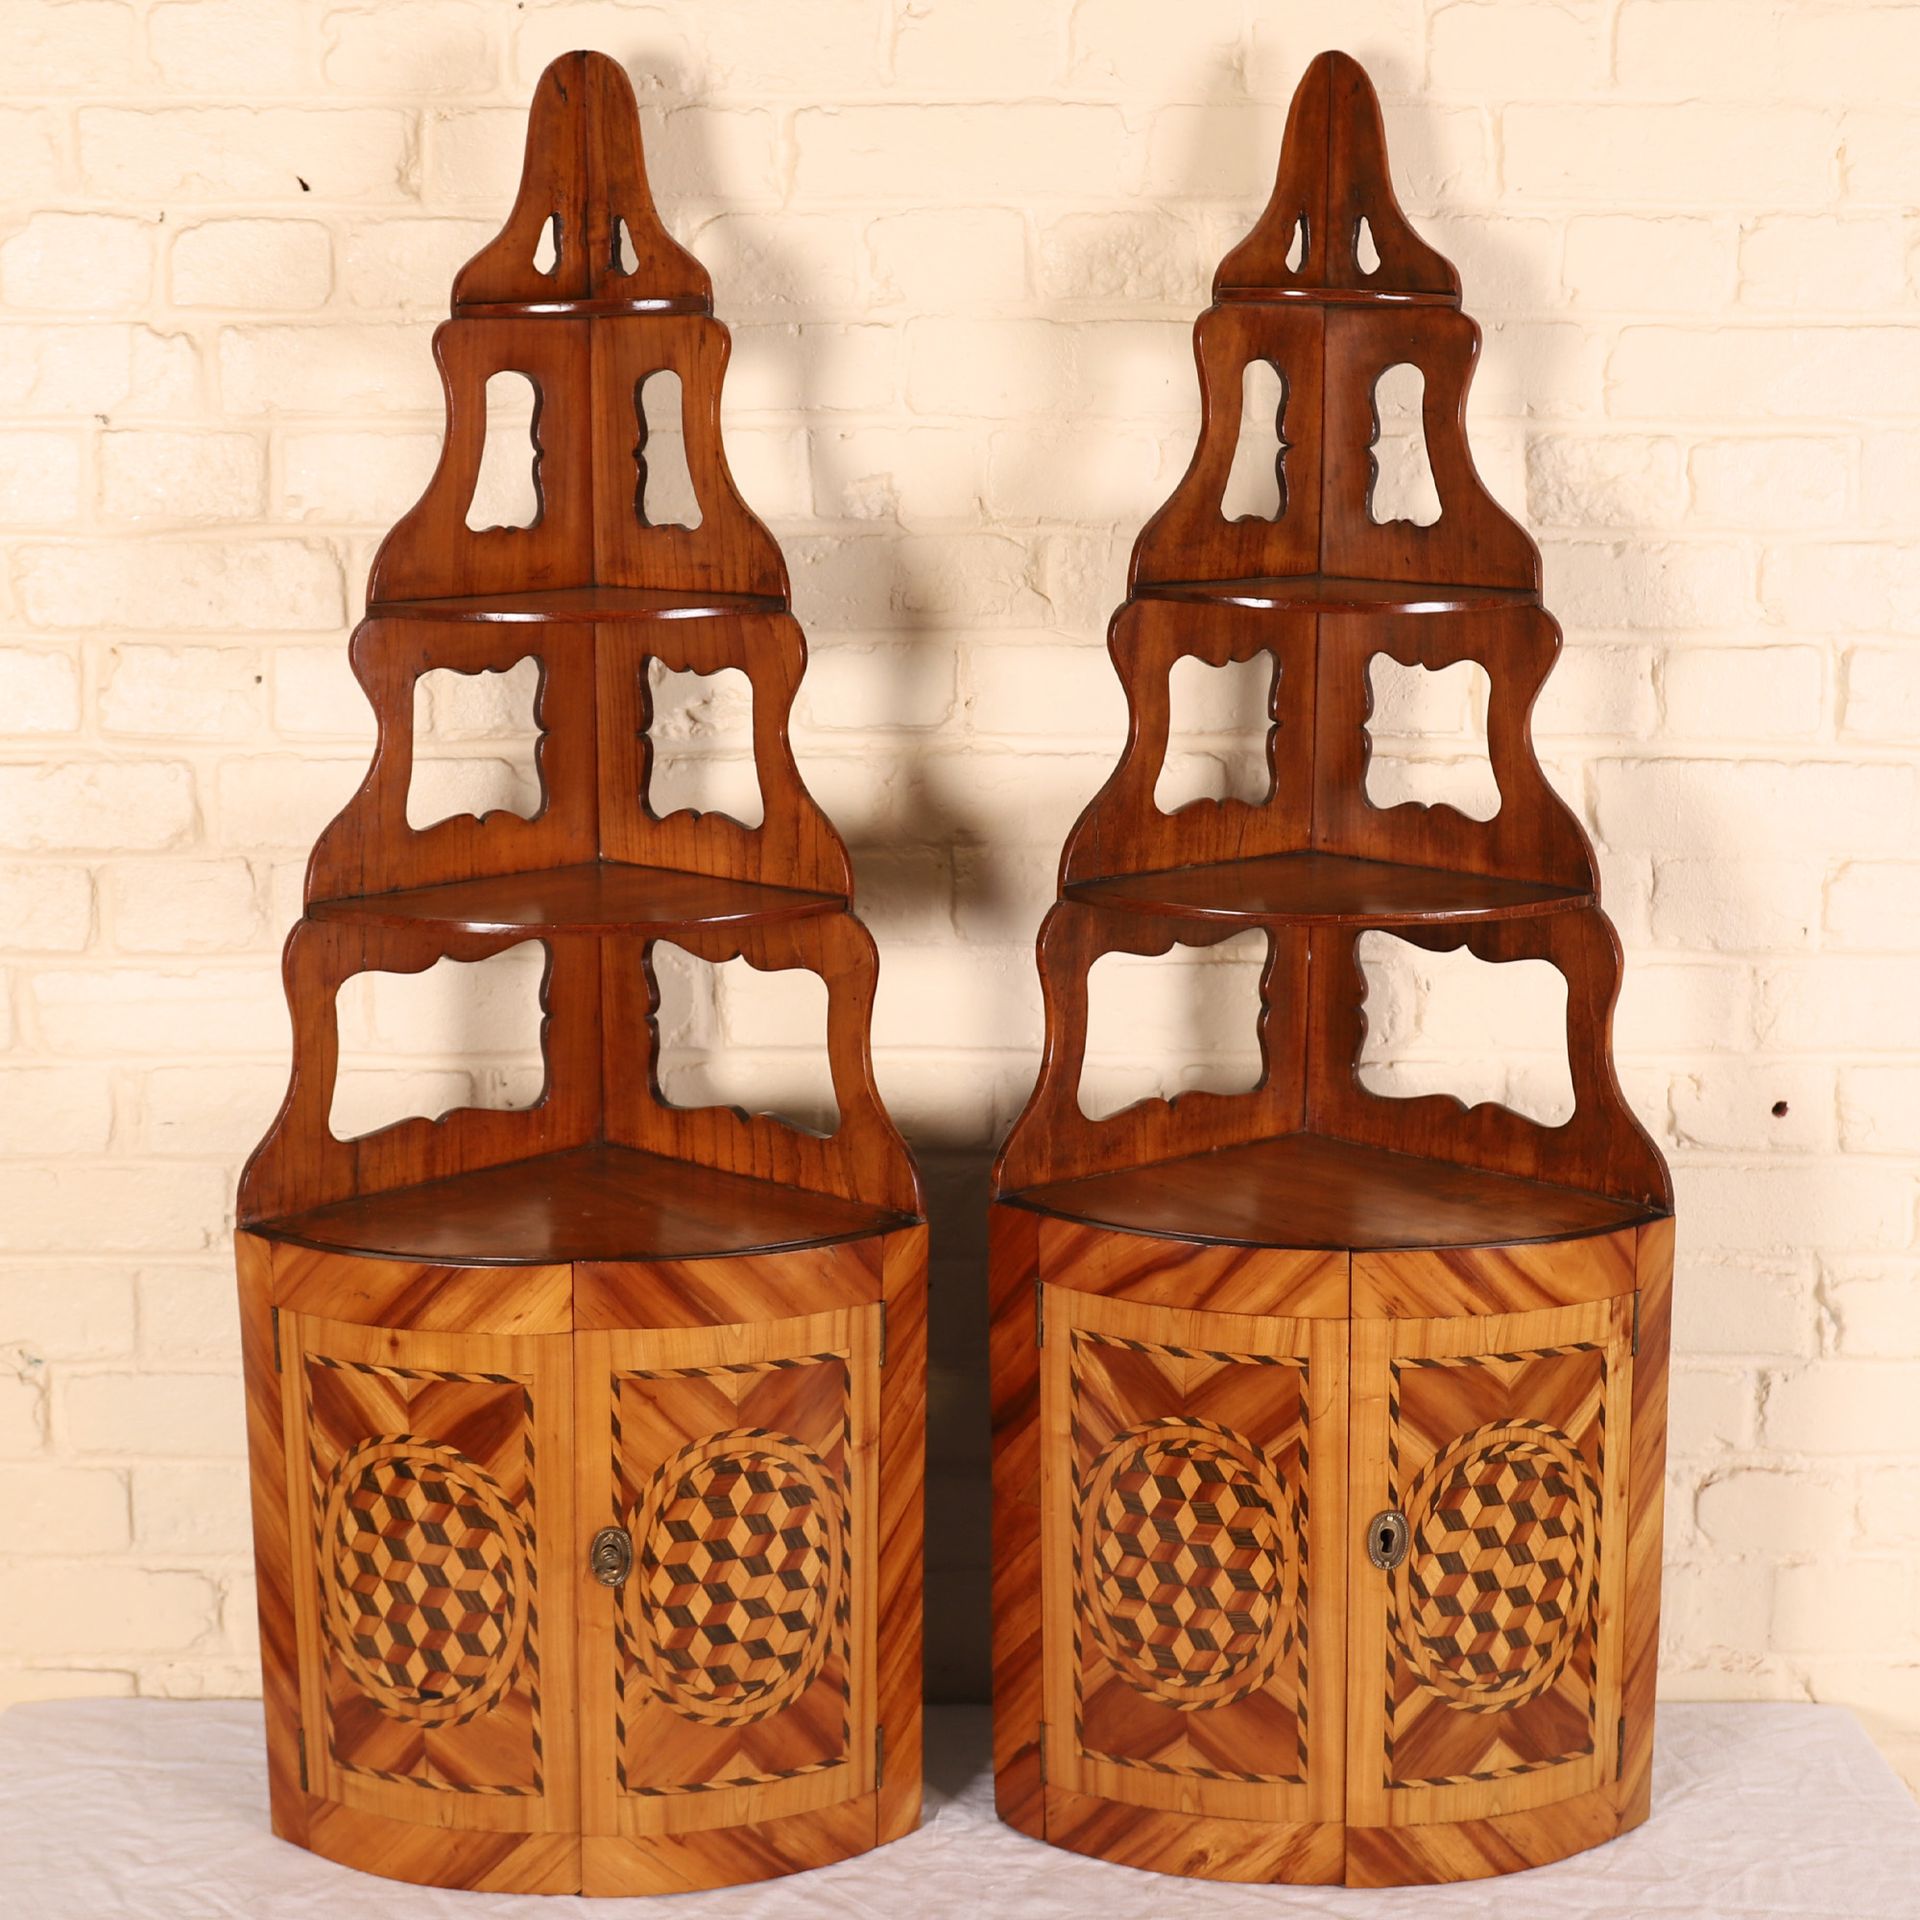 Null PAIR OF SMALL CORNER SCONCES IN MARQUETRY OF CUBES

Native veneer wood

Ope&hellip;